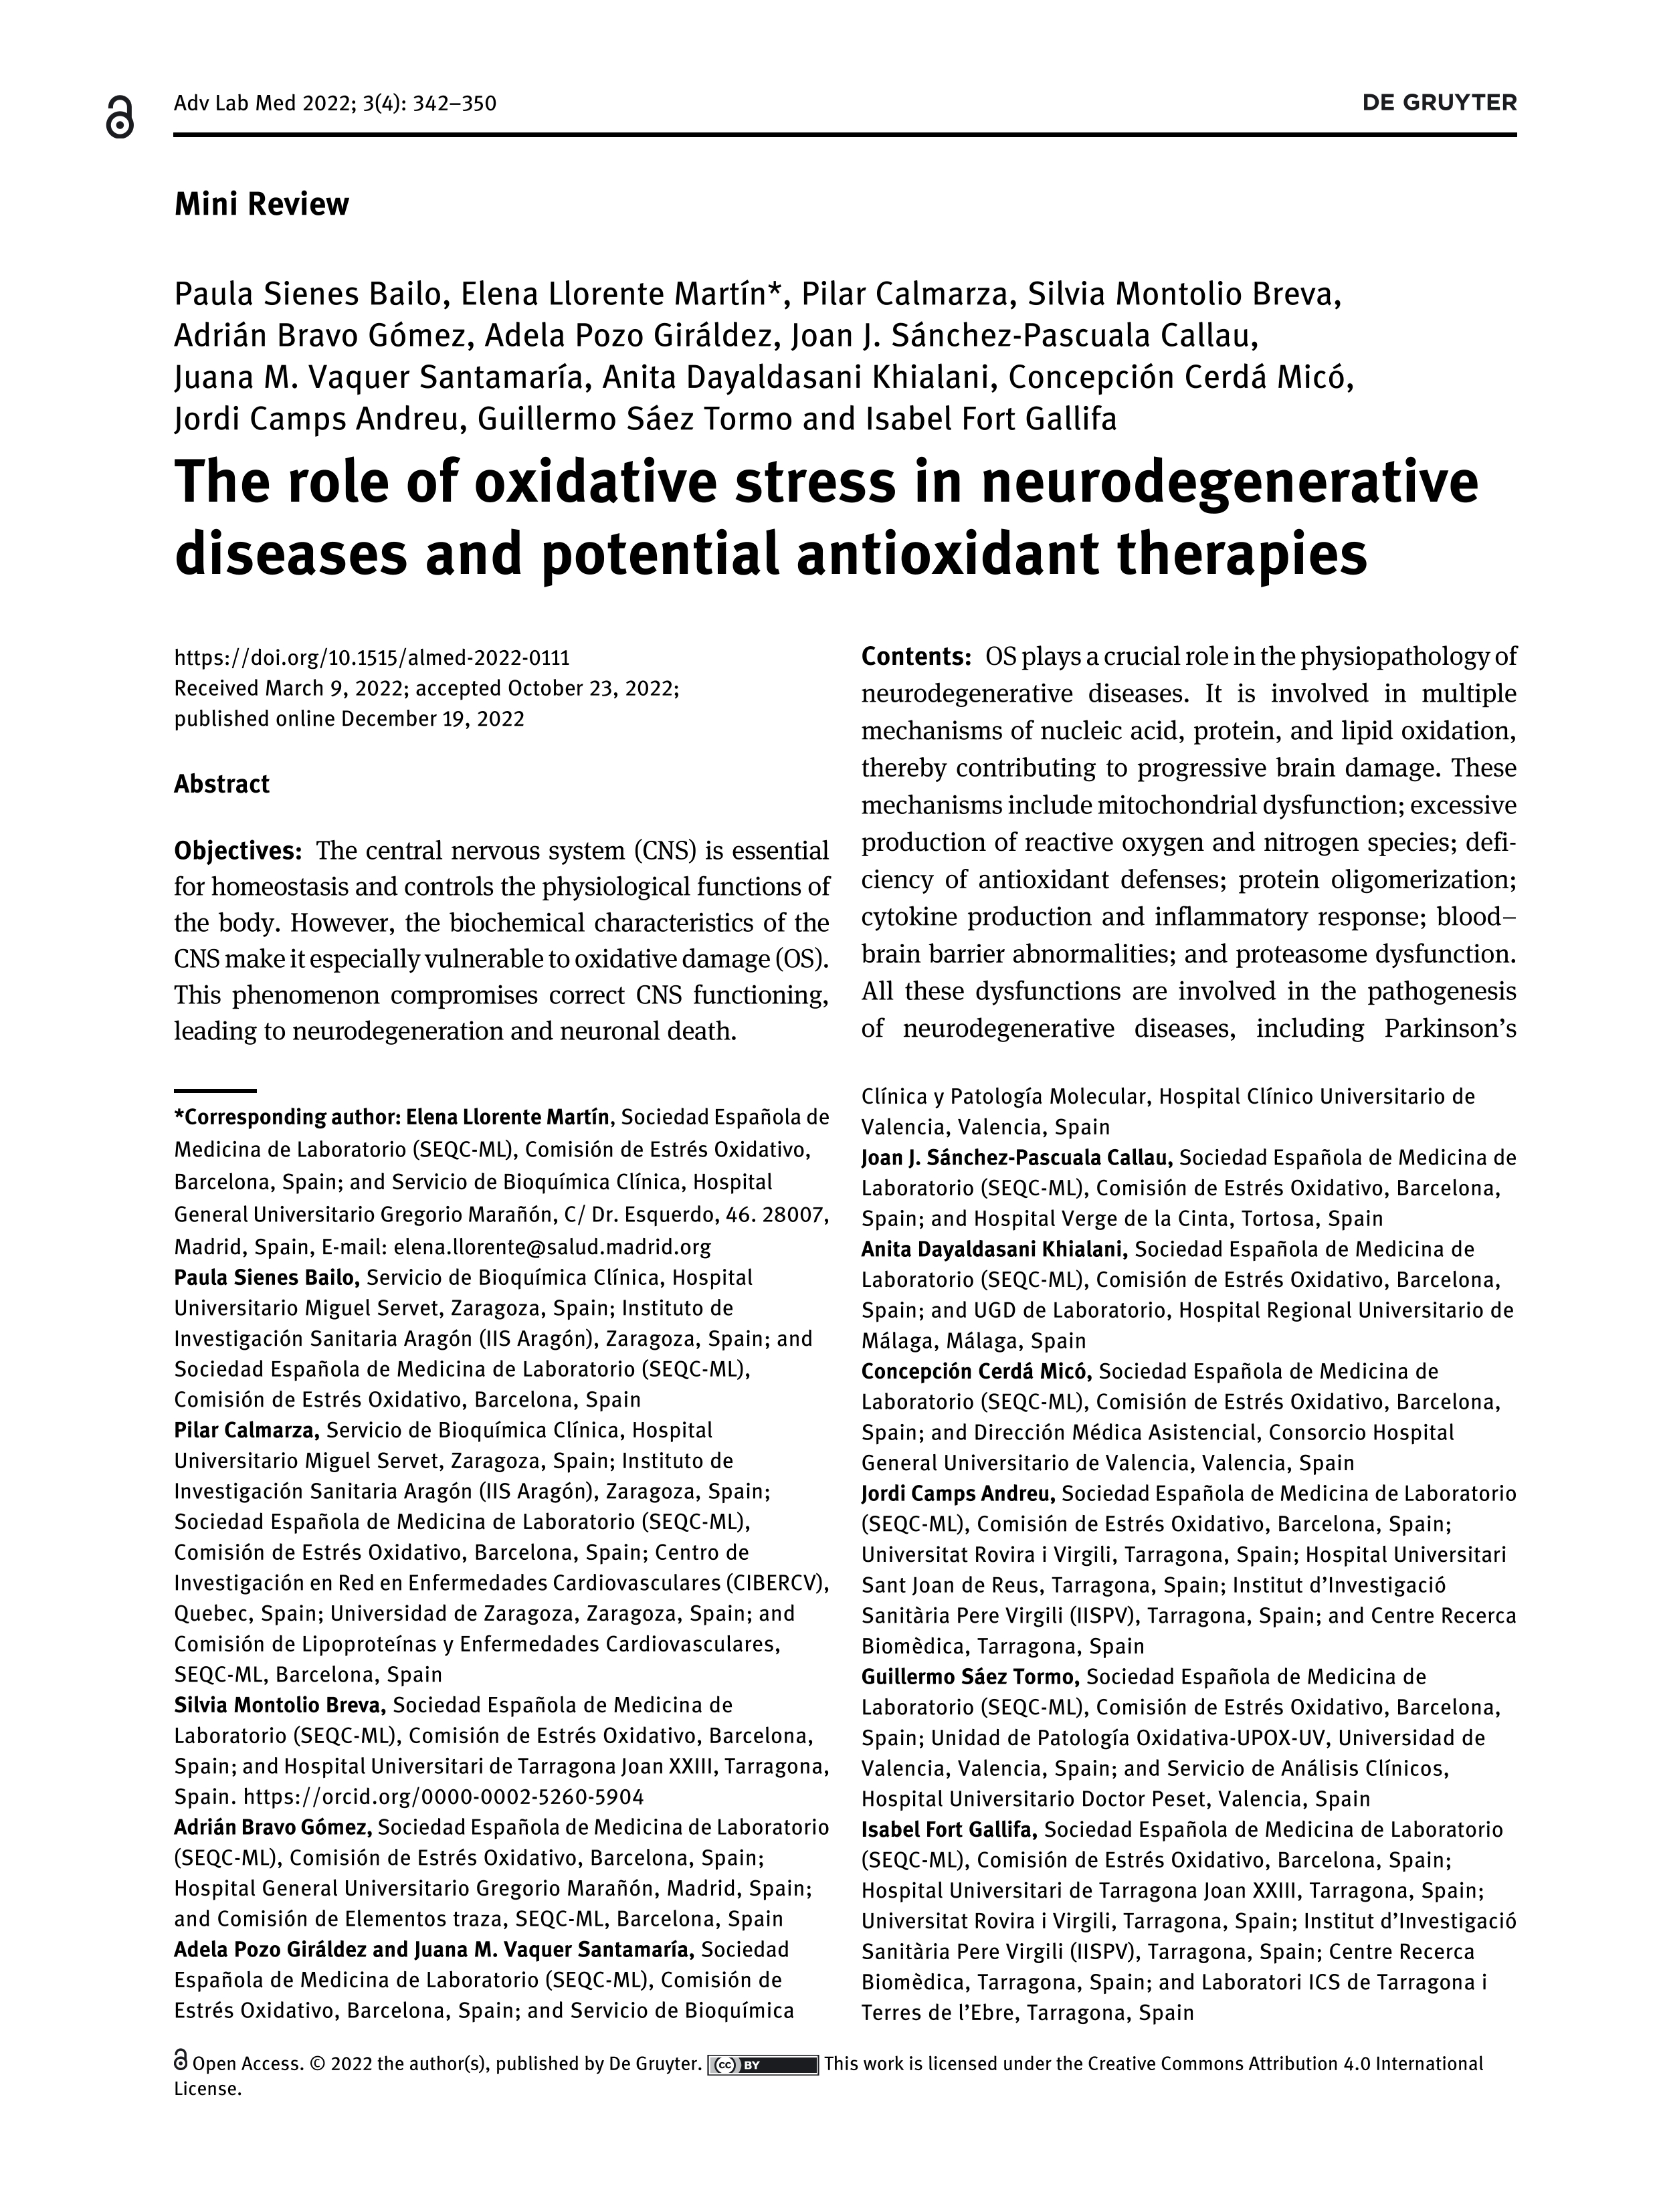 The role of oxidative stress in neurodegenerative diseases and potential antioxidant therapies